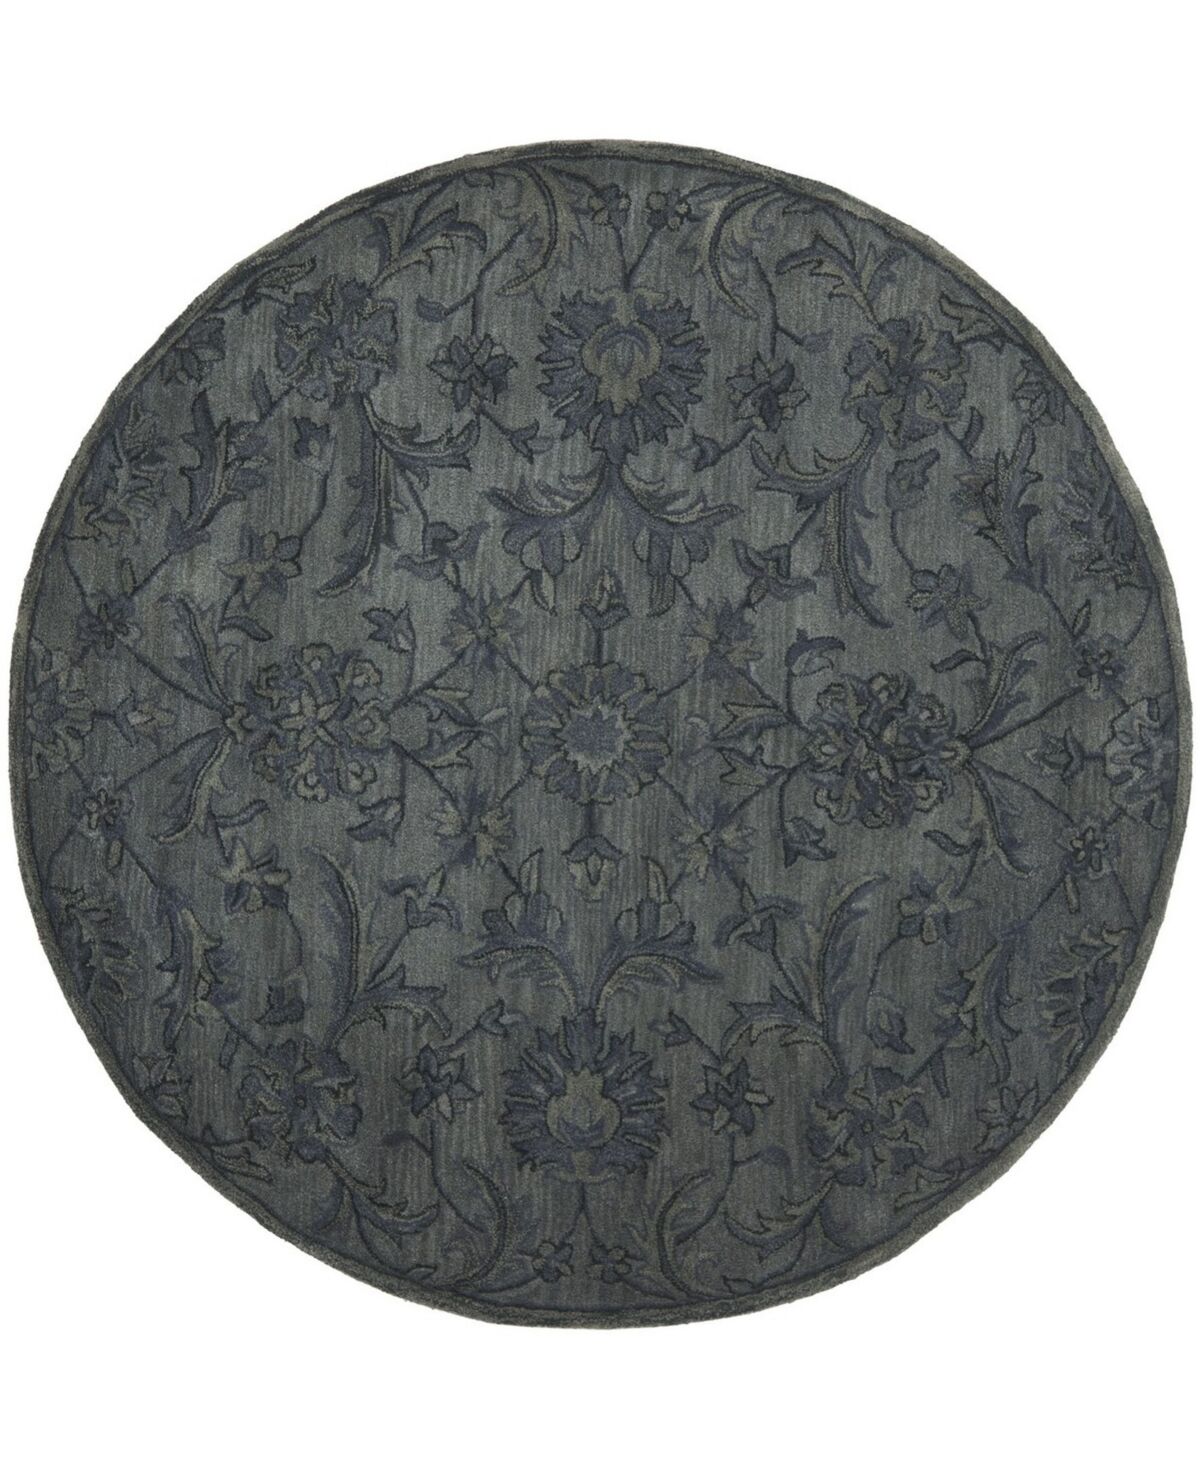 Safavieh Antiquity At824 Gray and Multi 6' x 6' Round Area Rug - Gray